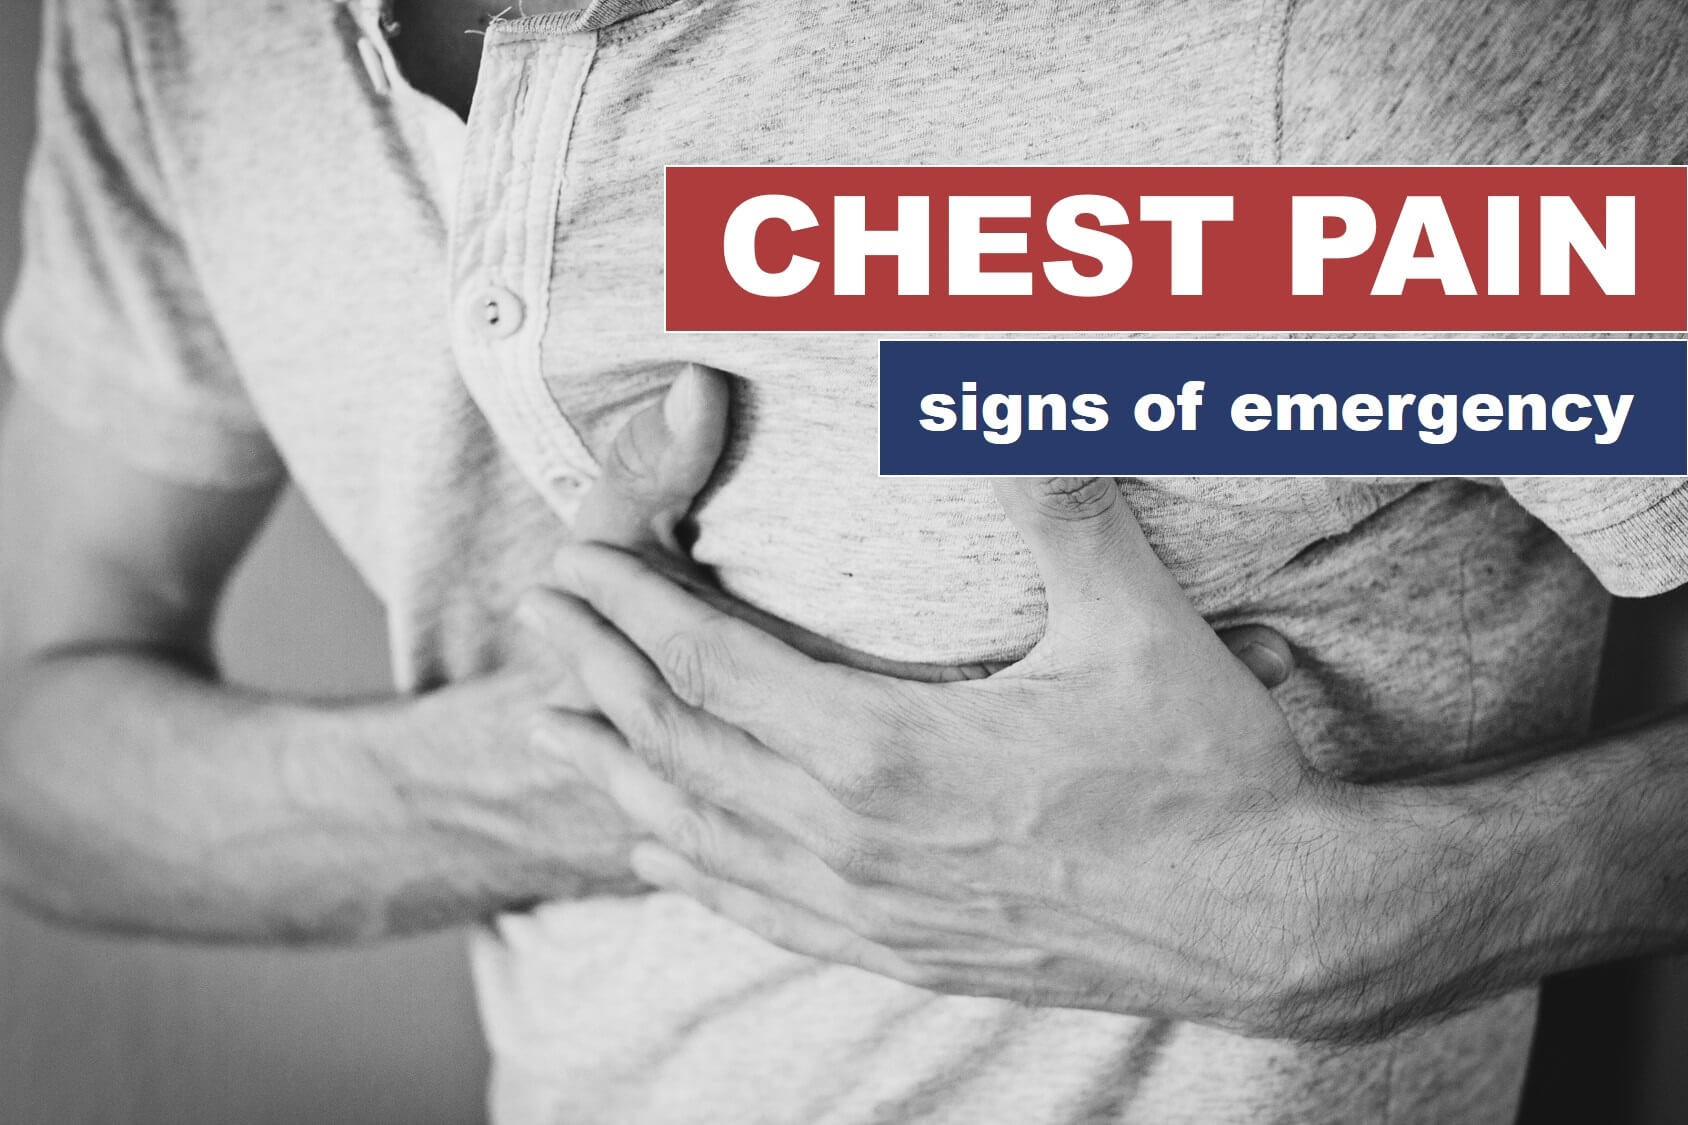 chest_pain_emergency_banner